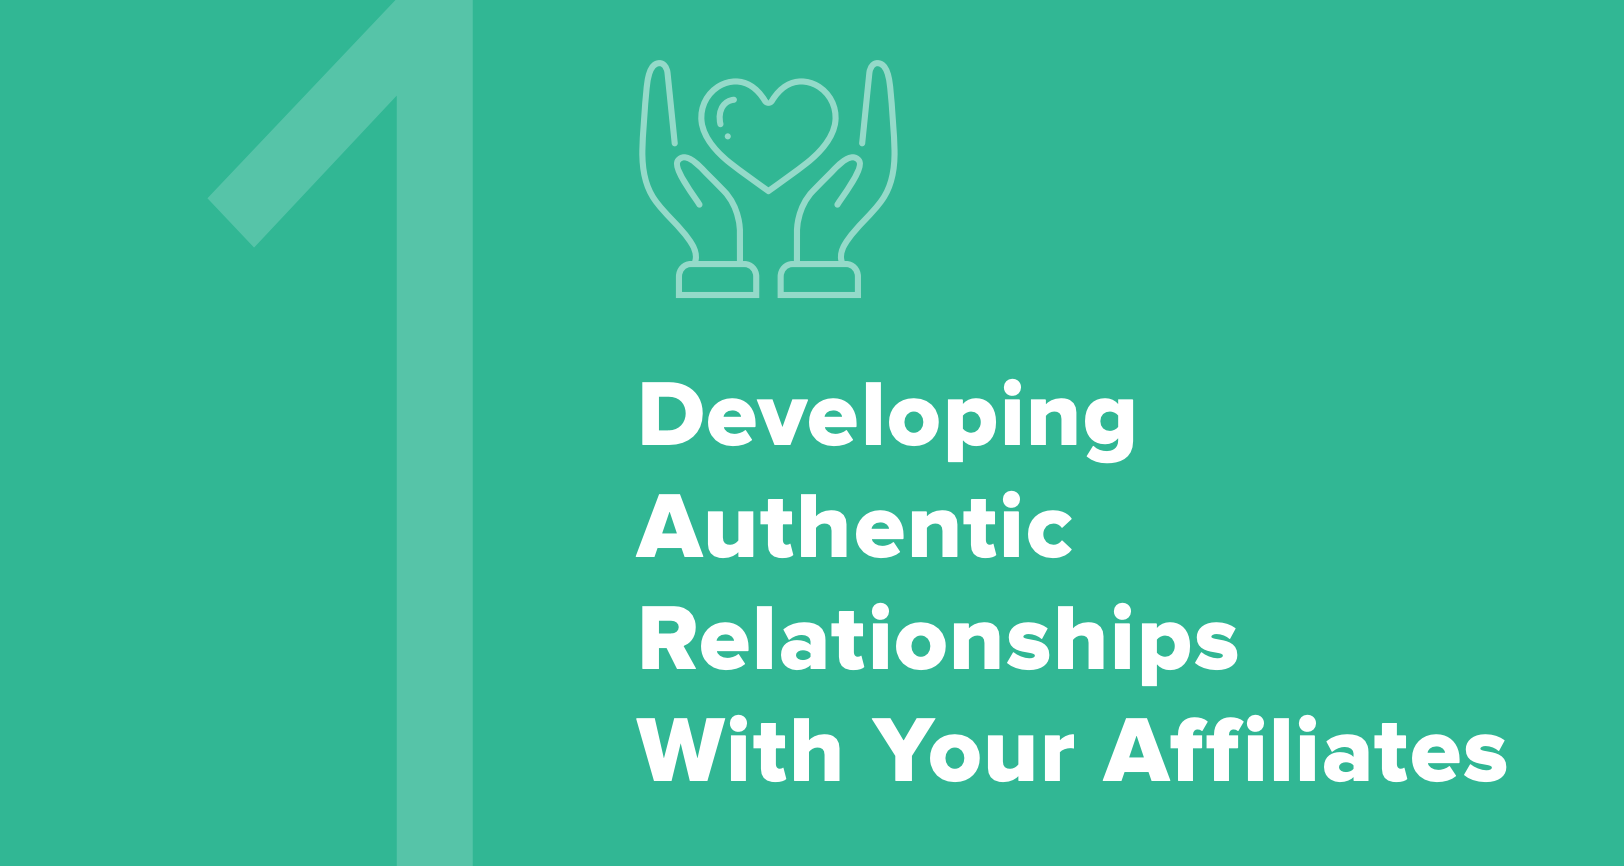 Developing authentic relationships with your affiliates